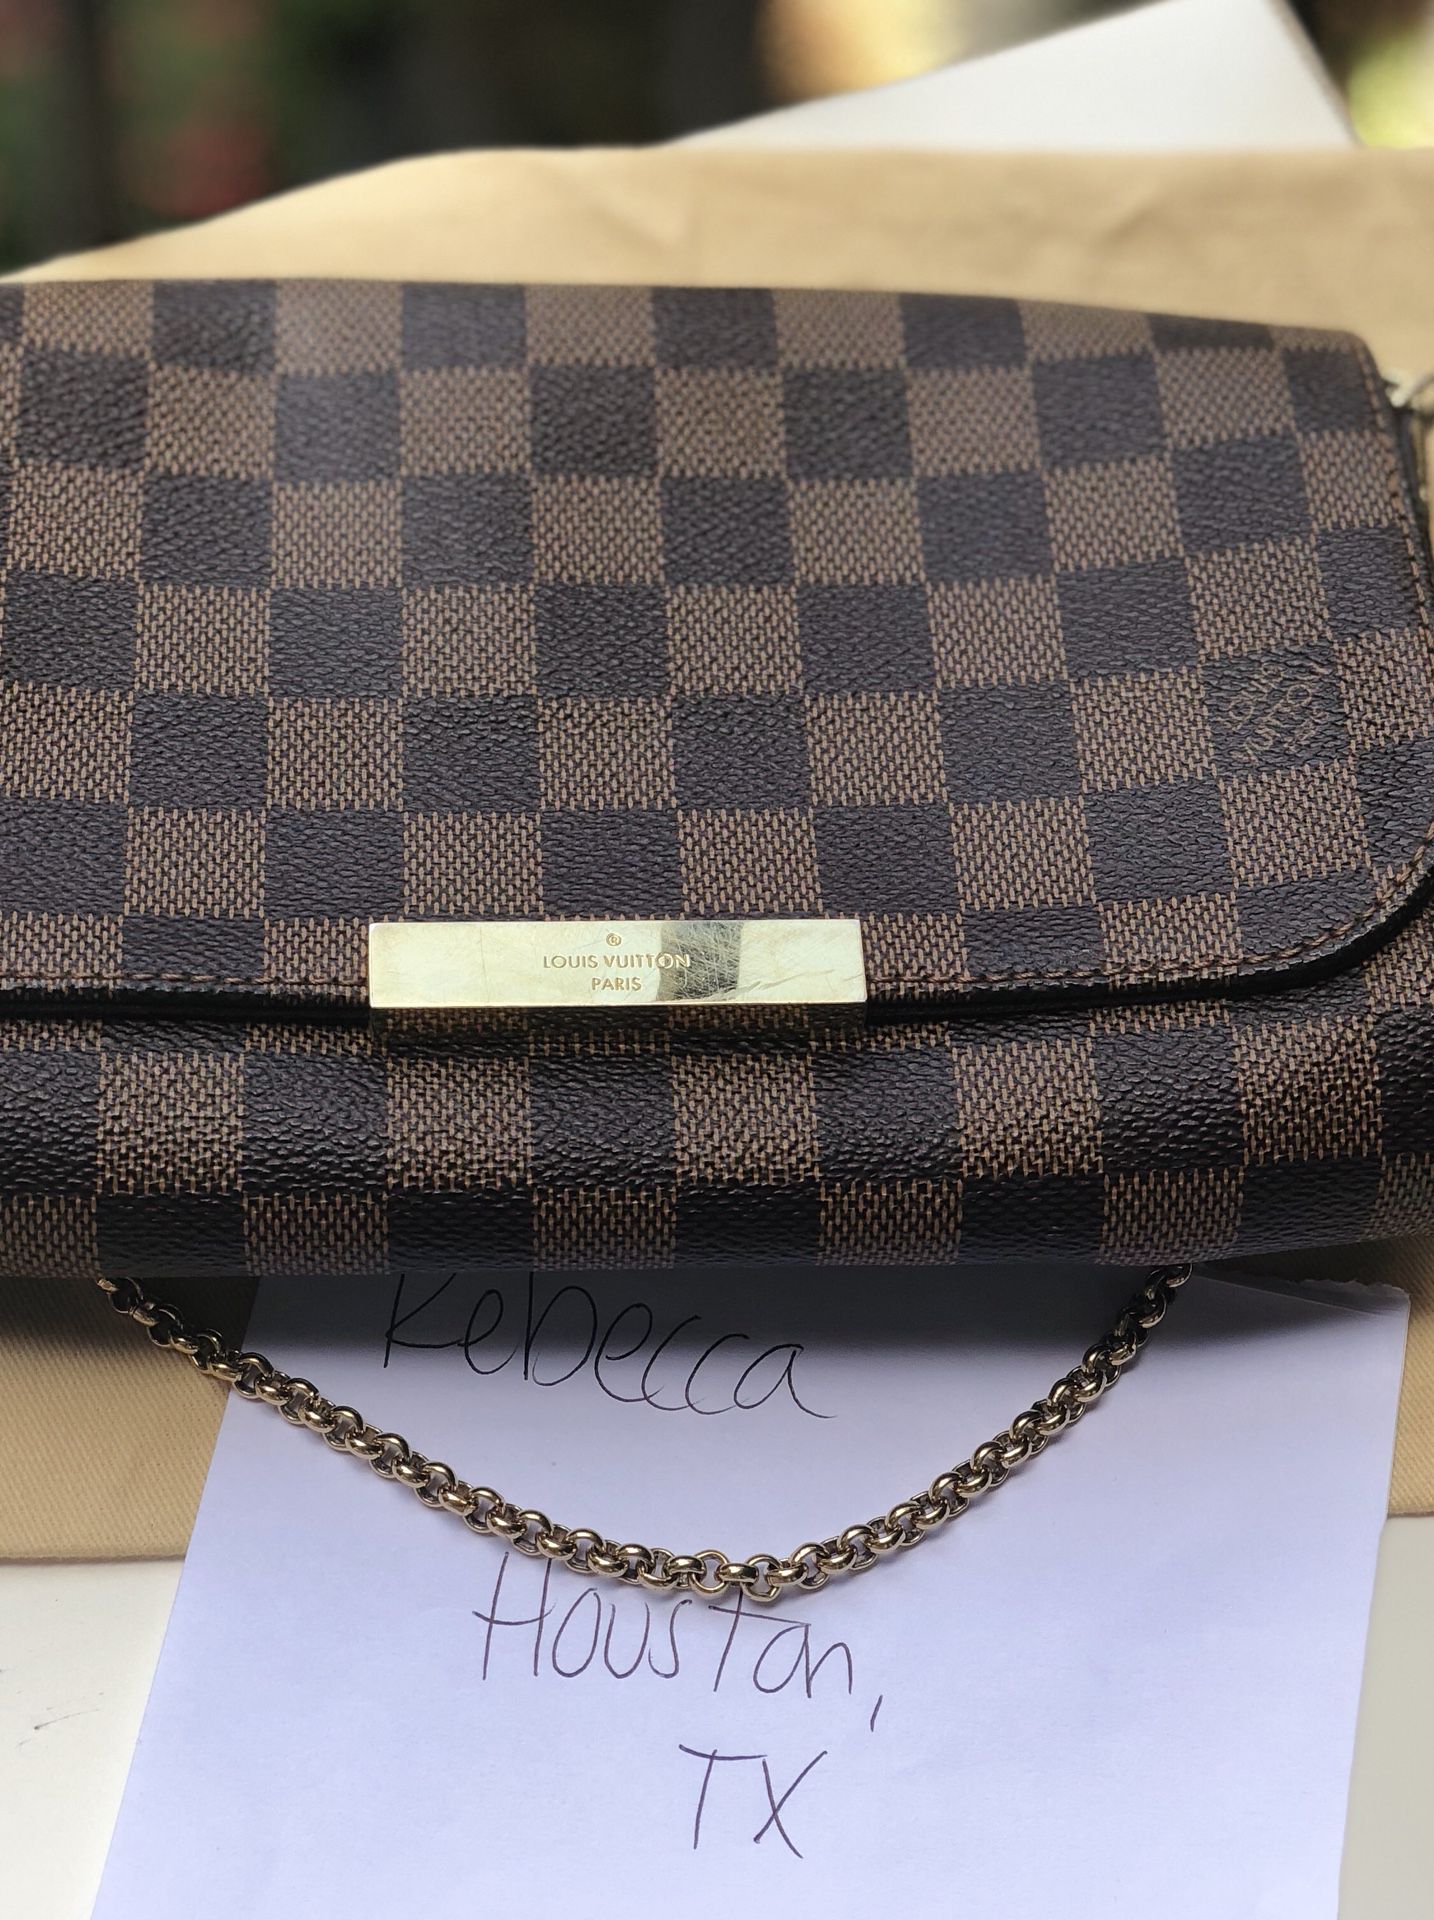 Louis Vuitton Trevi Pm for Sale in Houston, TX - OfferUp